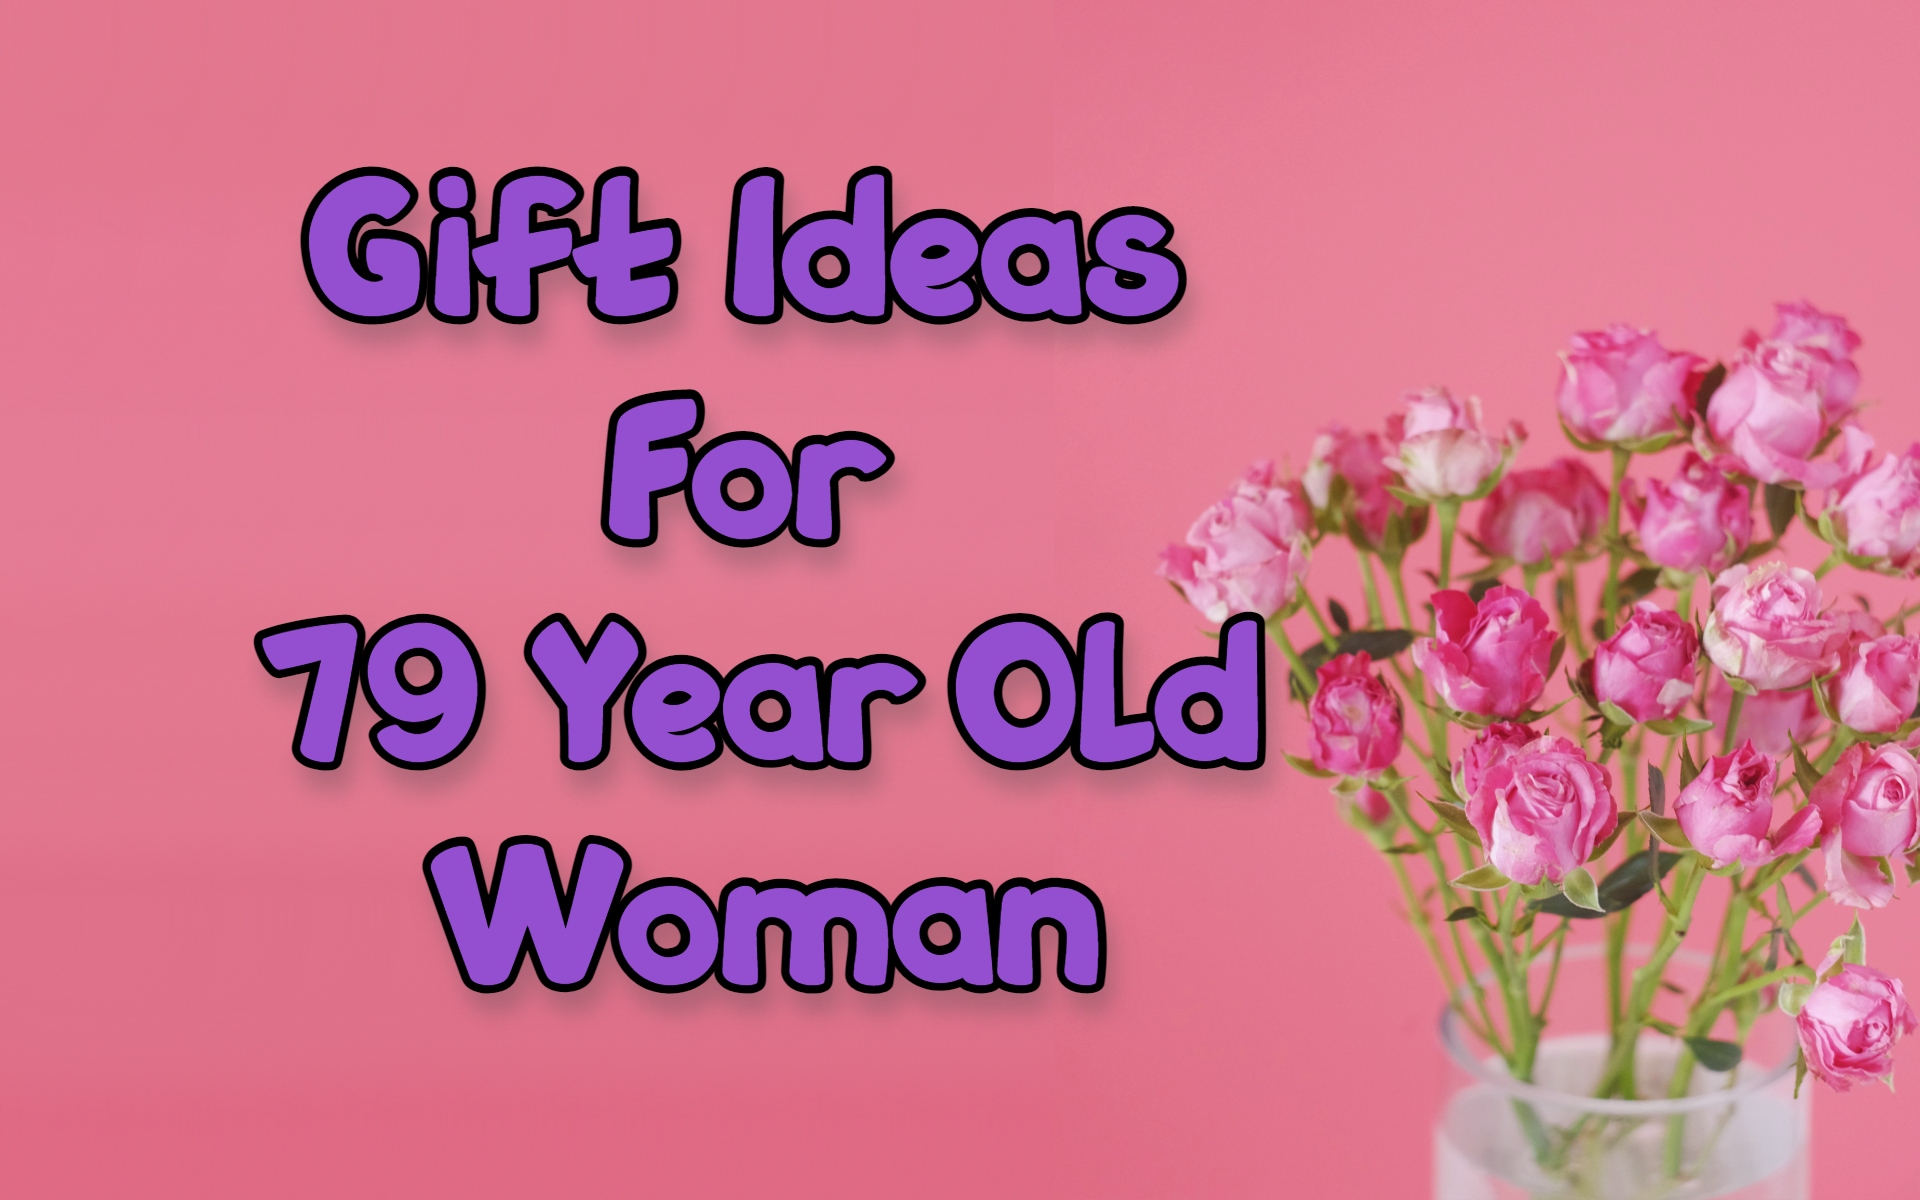 Cover image of gift ideas for 79-year-old woman by Giftsedge